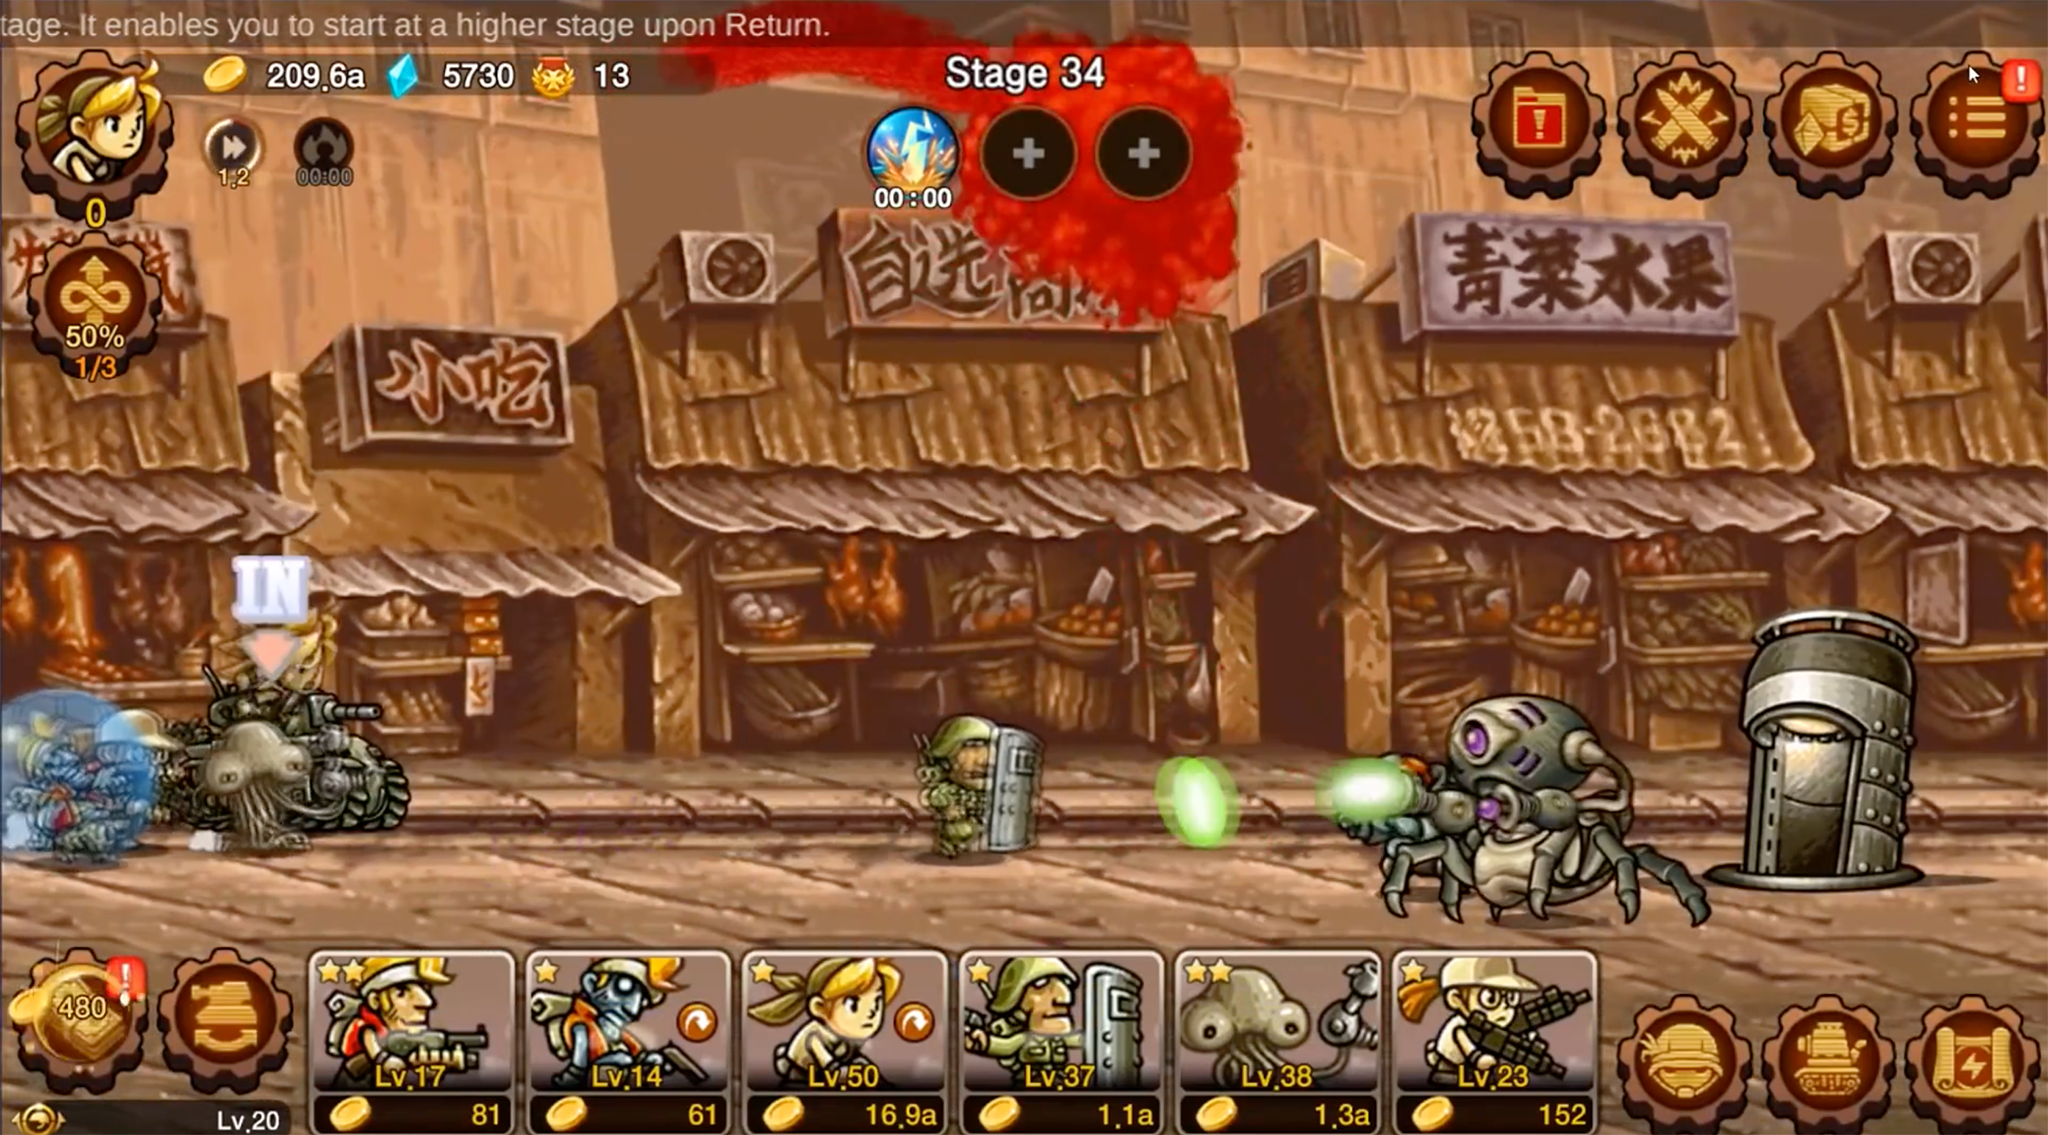 Tong_hop_game_mobile_3_4_tinhte_6.png